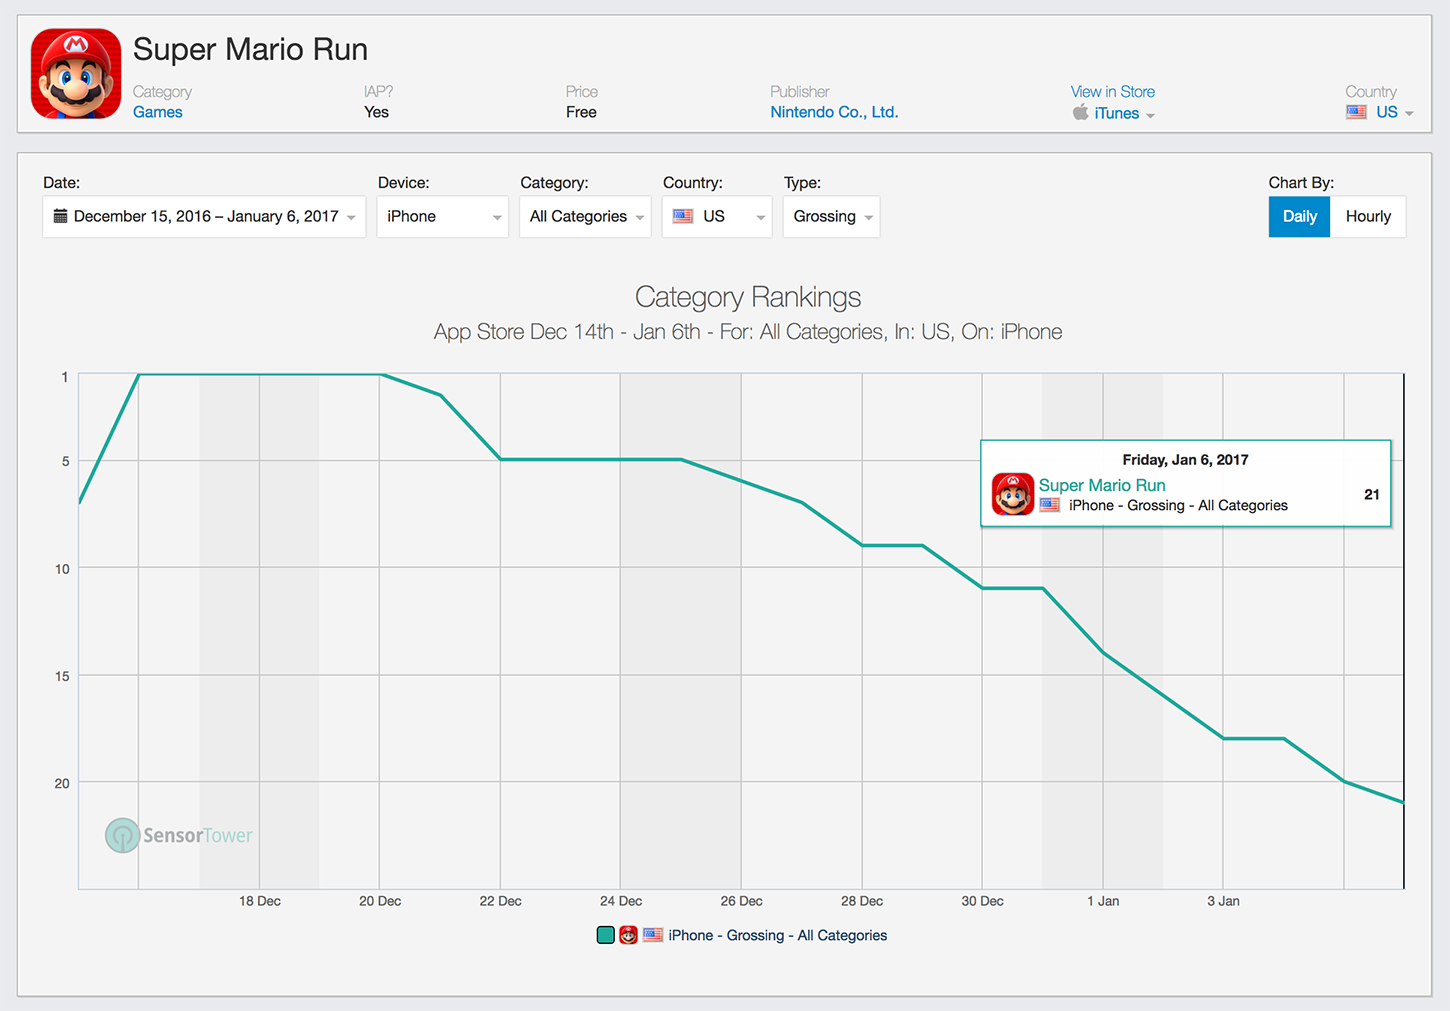 Super Mario Run Top Grossing Category Rankings for the U.S. App Store in December 2016